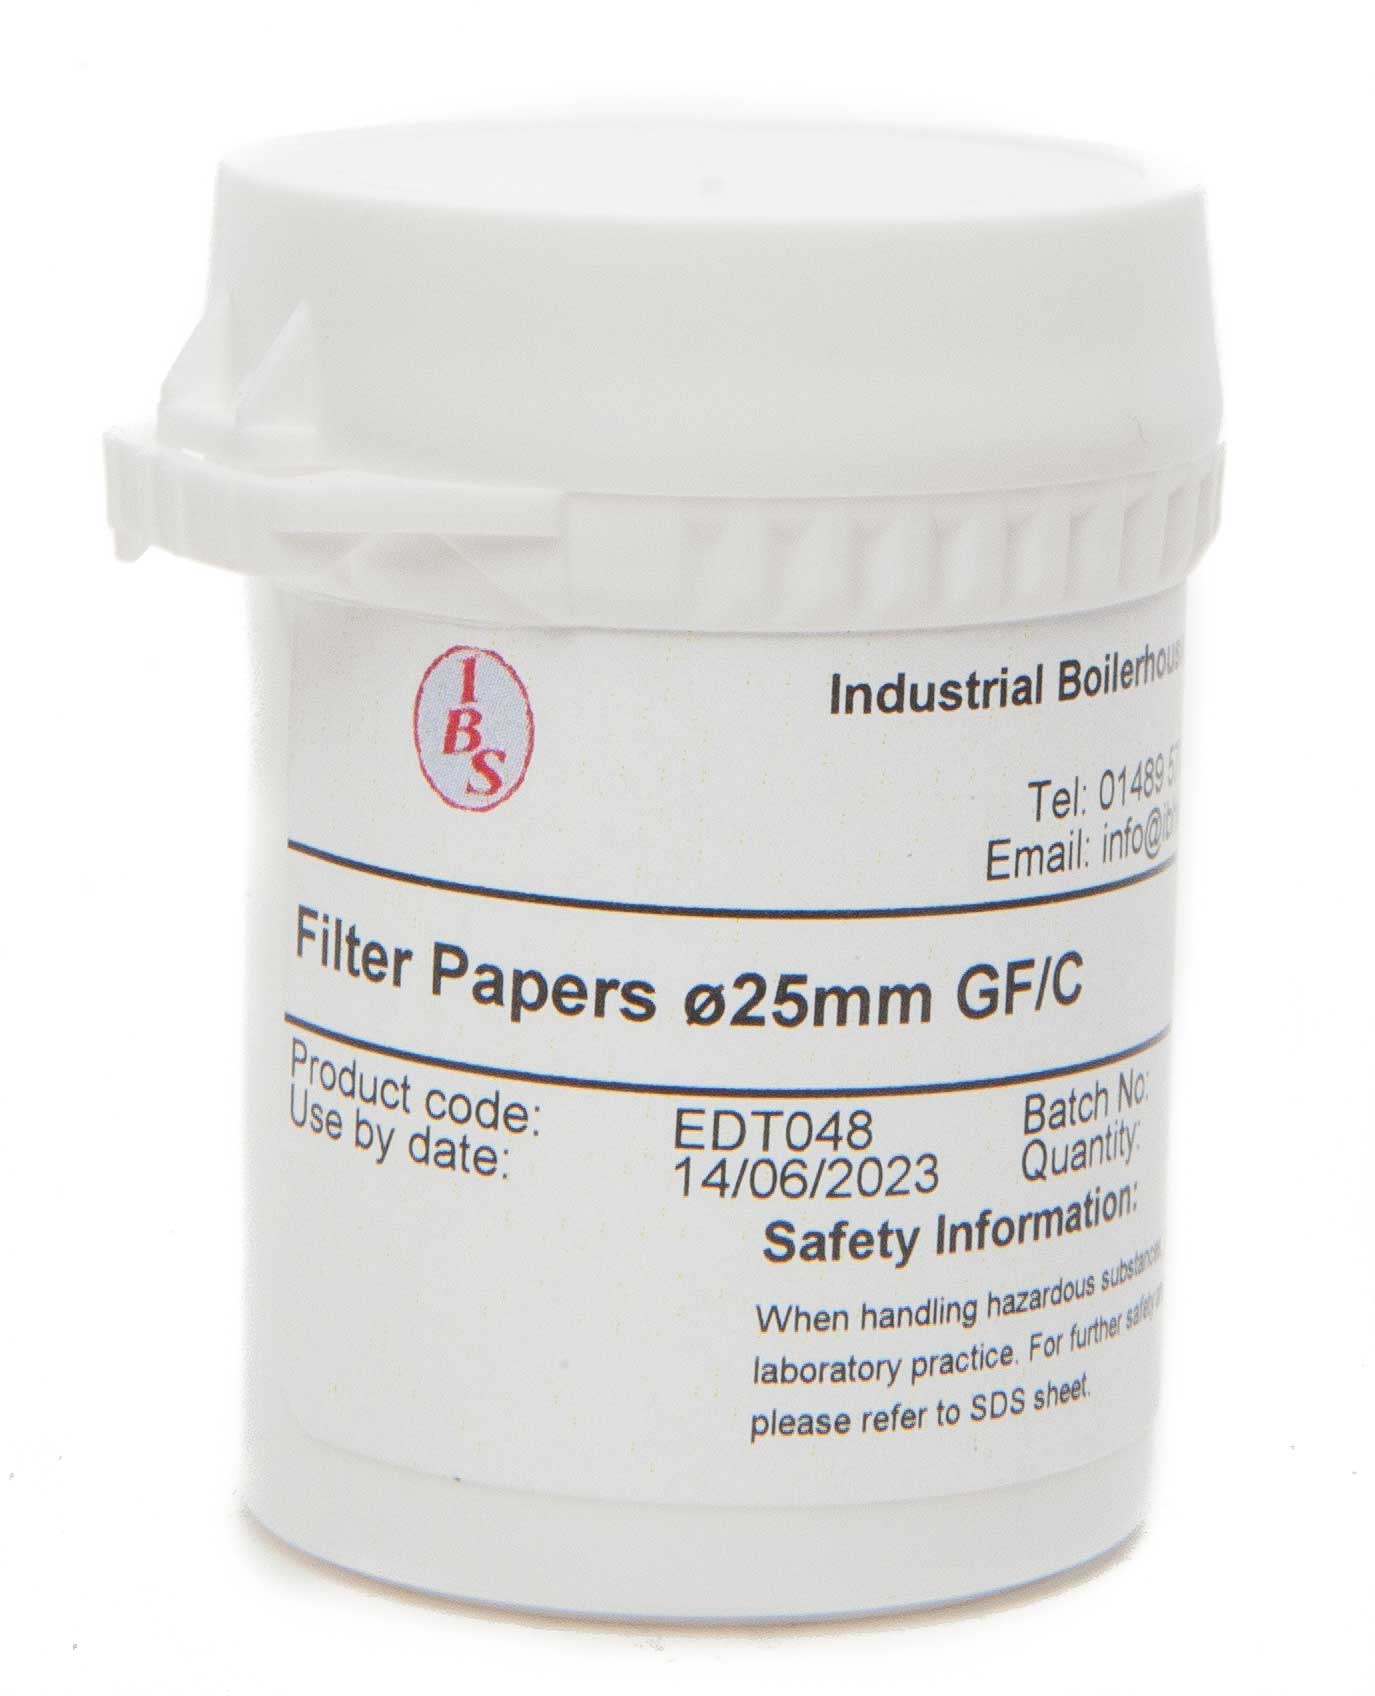 Filter Papers 25mm GF/C Pack of 50